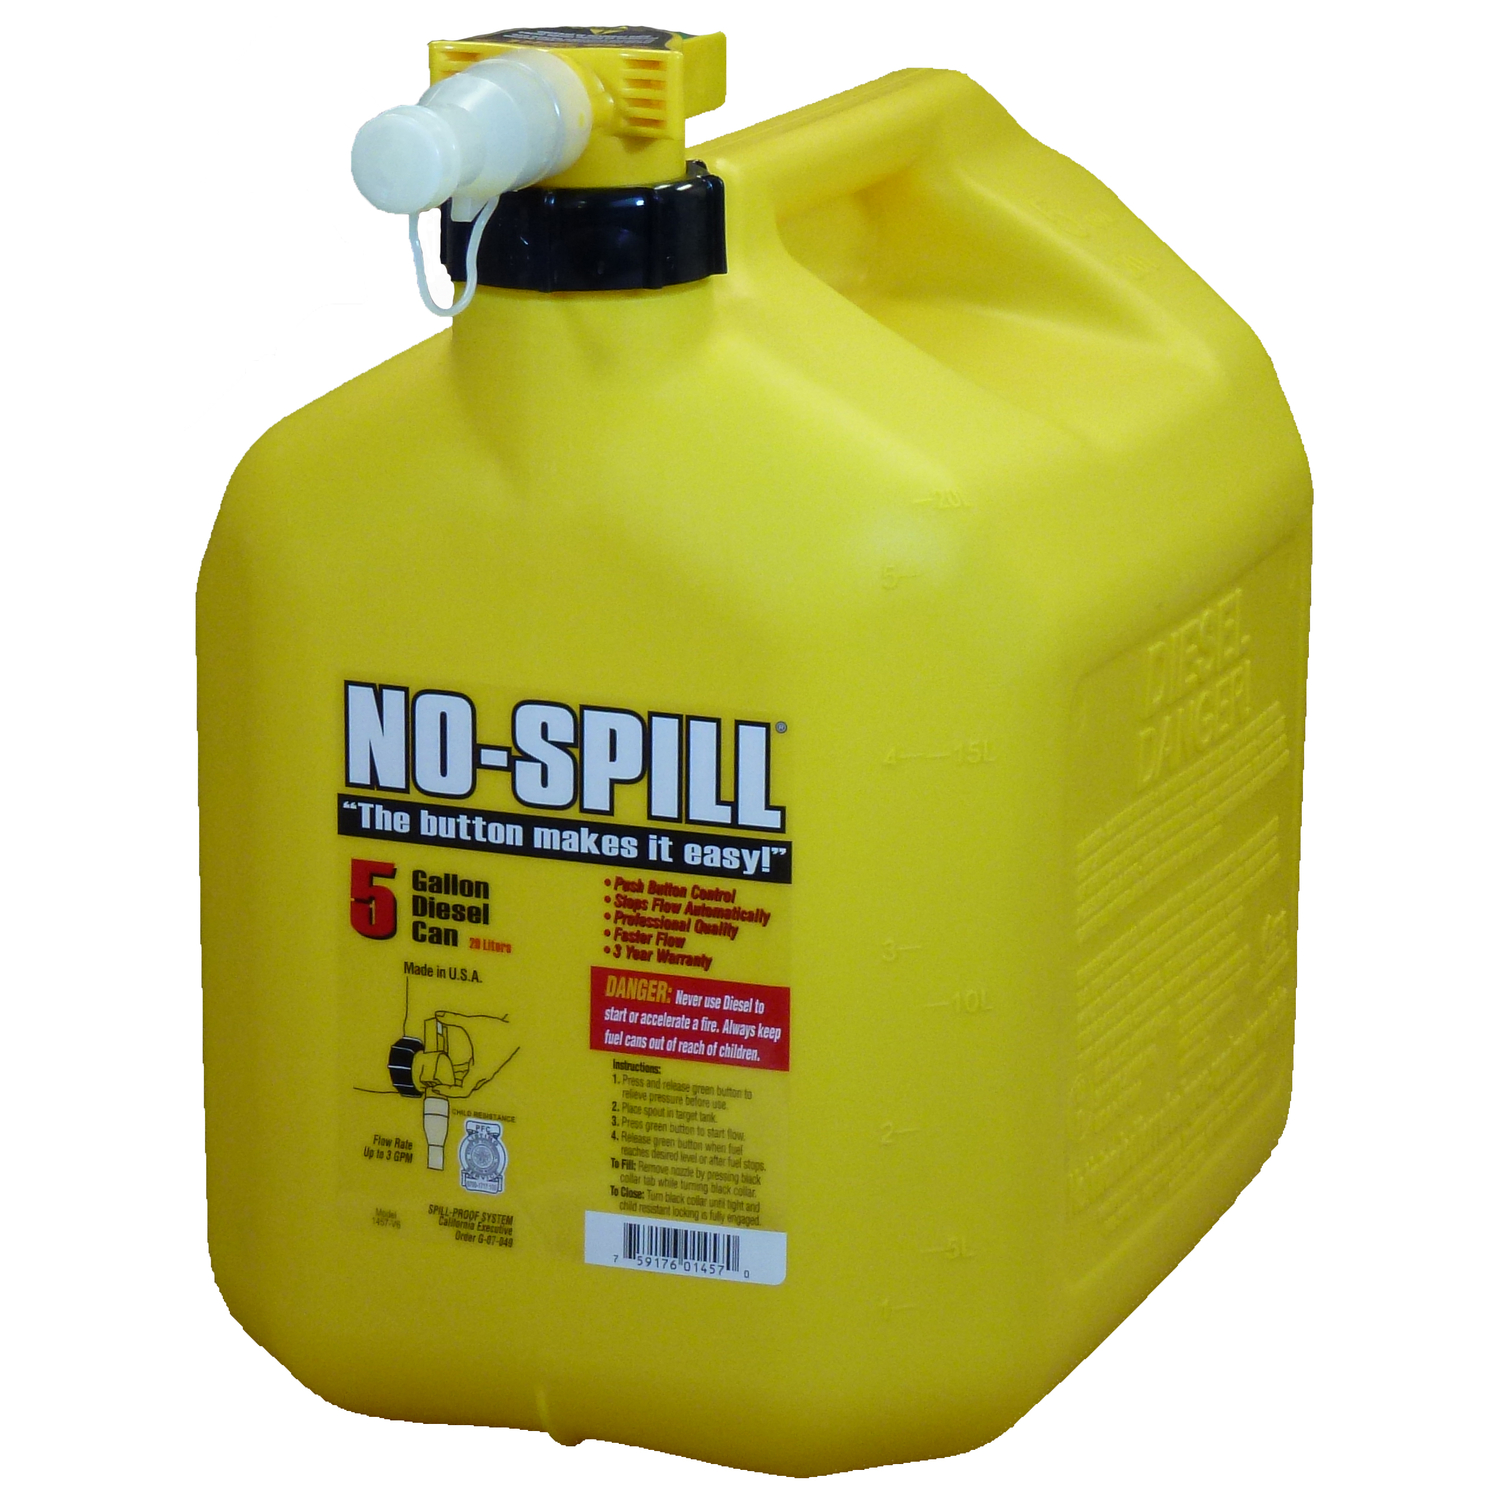 New Stens 5 Gallon Diesel Can 765-108 for No-Spill 1457